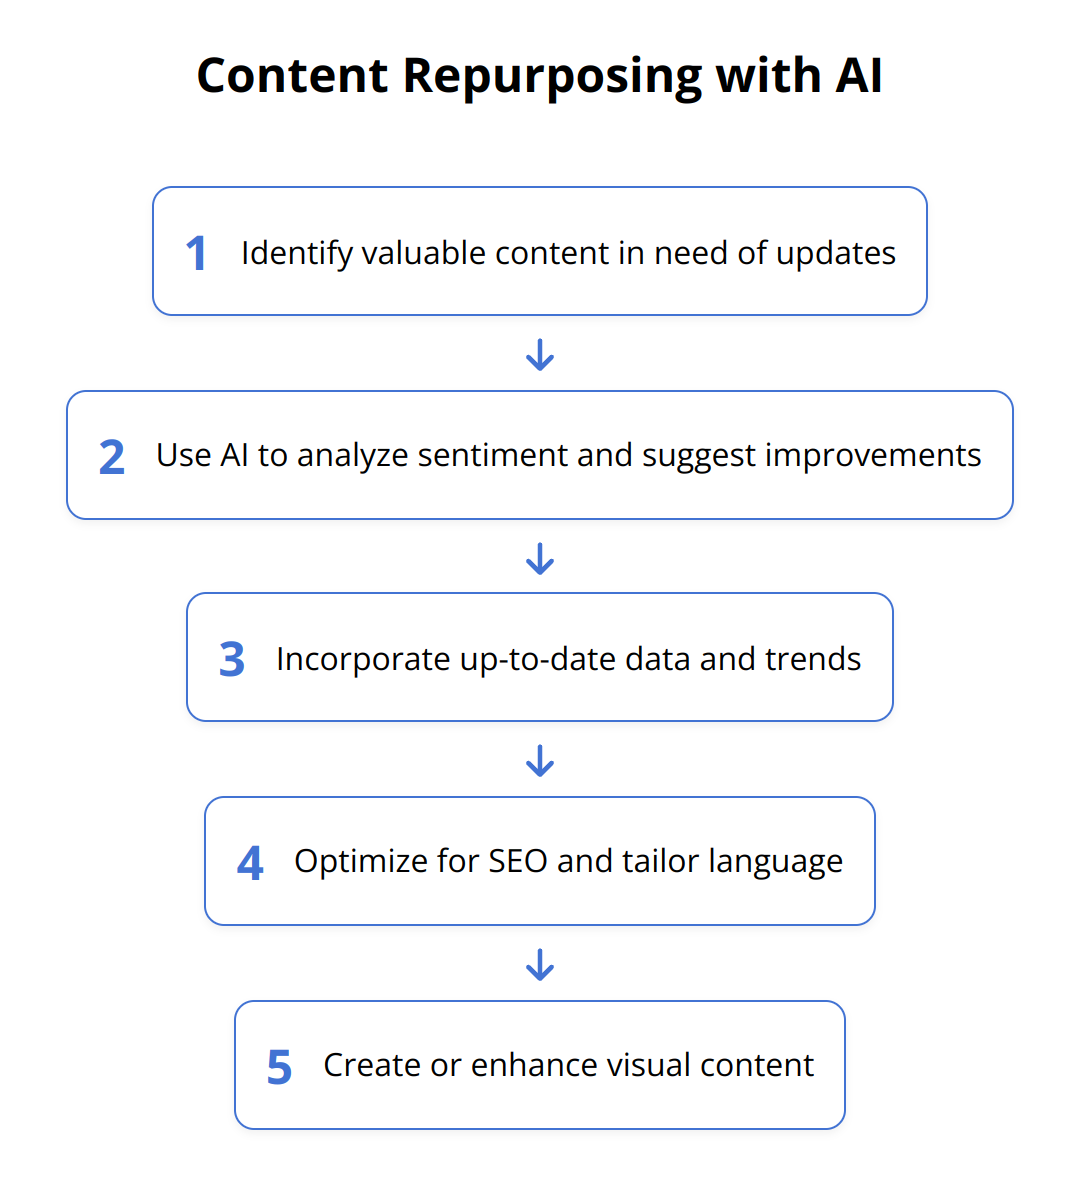 Flow Chart - Content Repurposing with AI